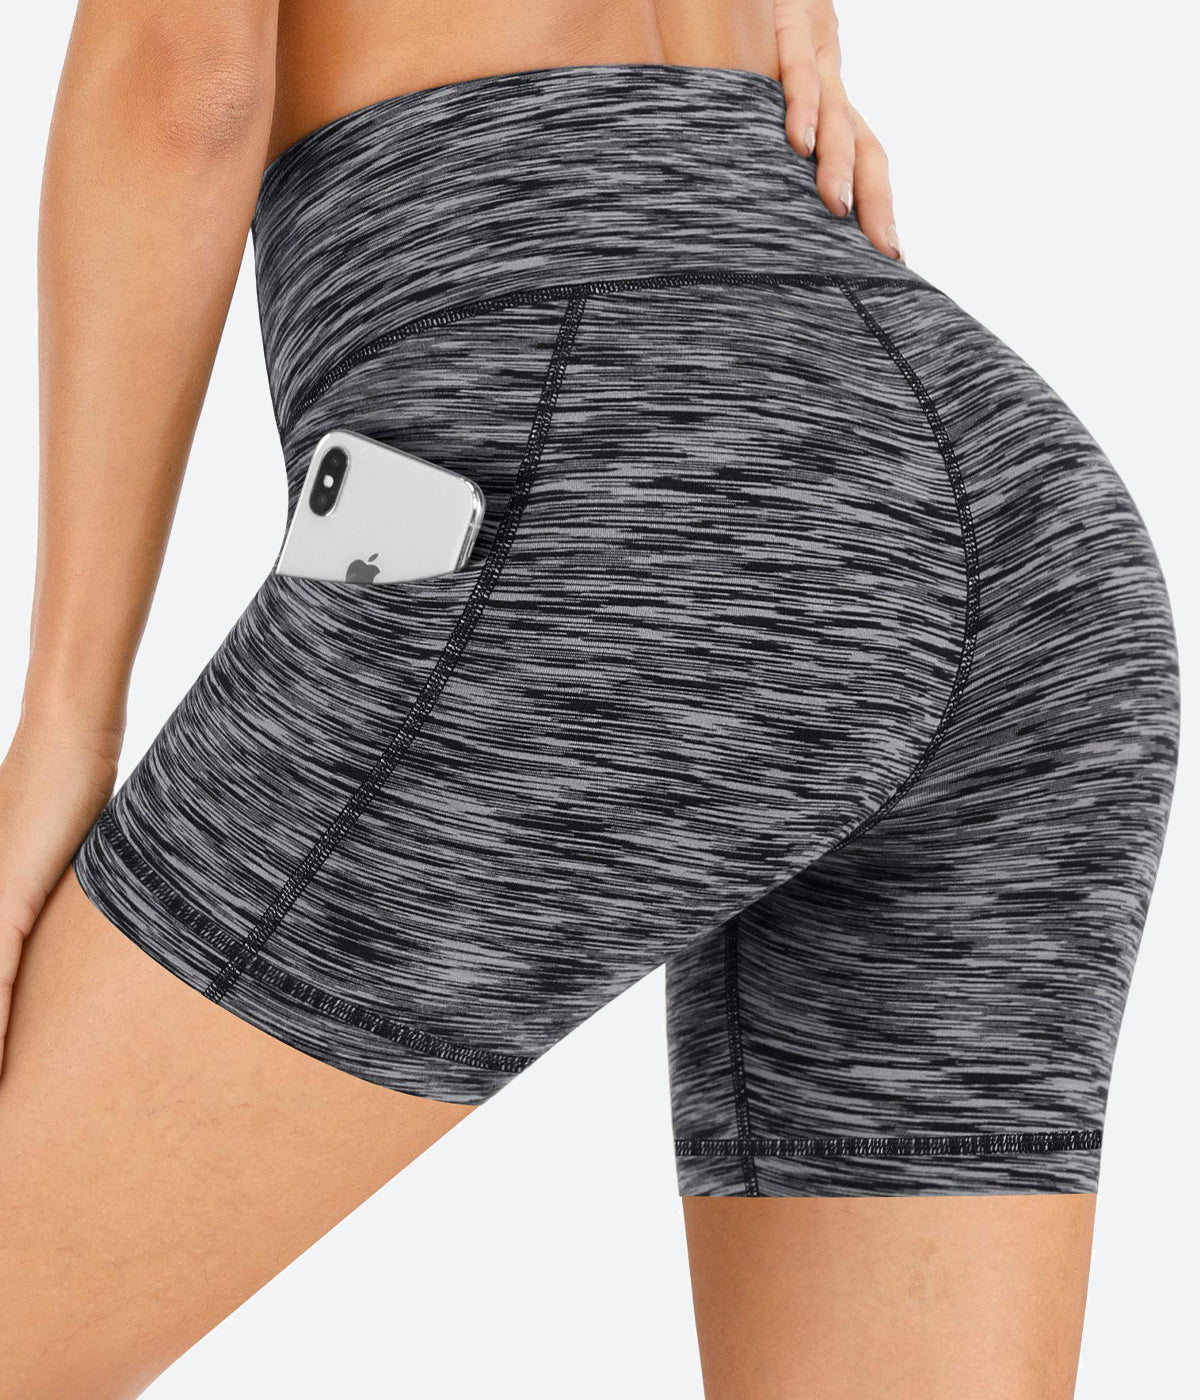 IUGA Yoga Shorts for Women with Pockets 8/5 Biker Shorts for